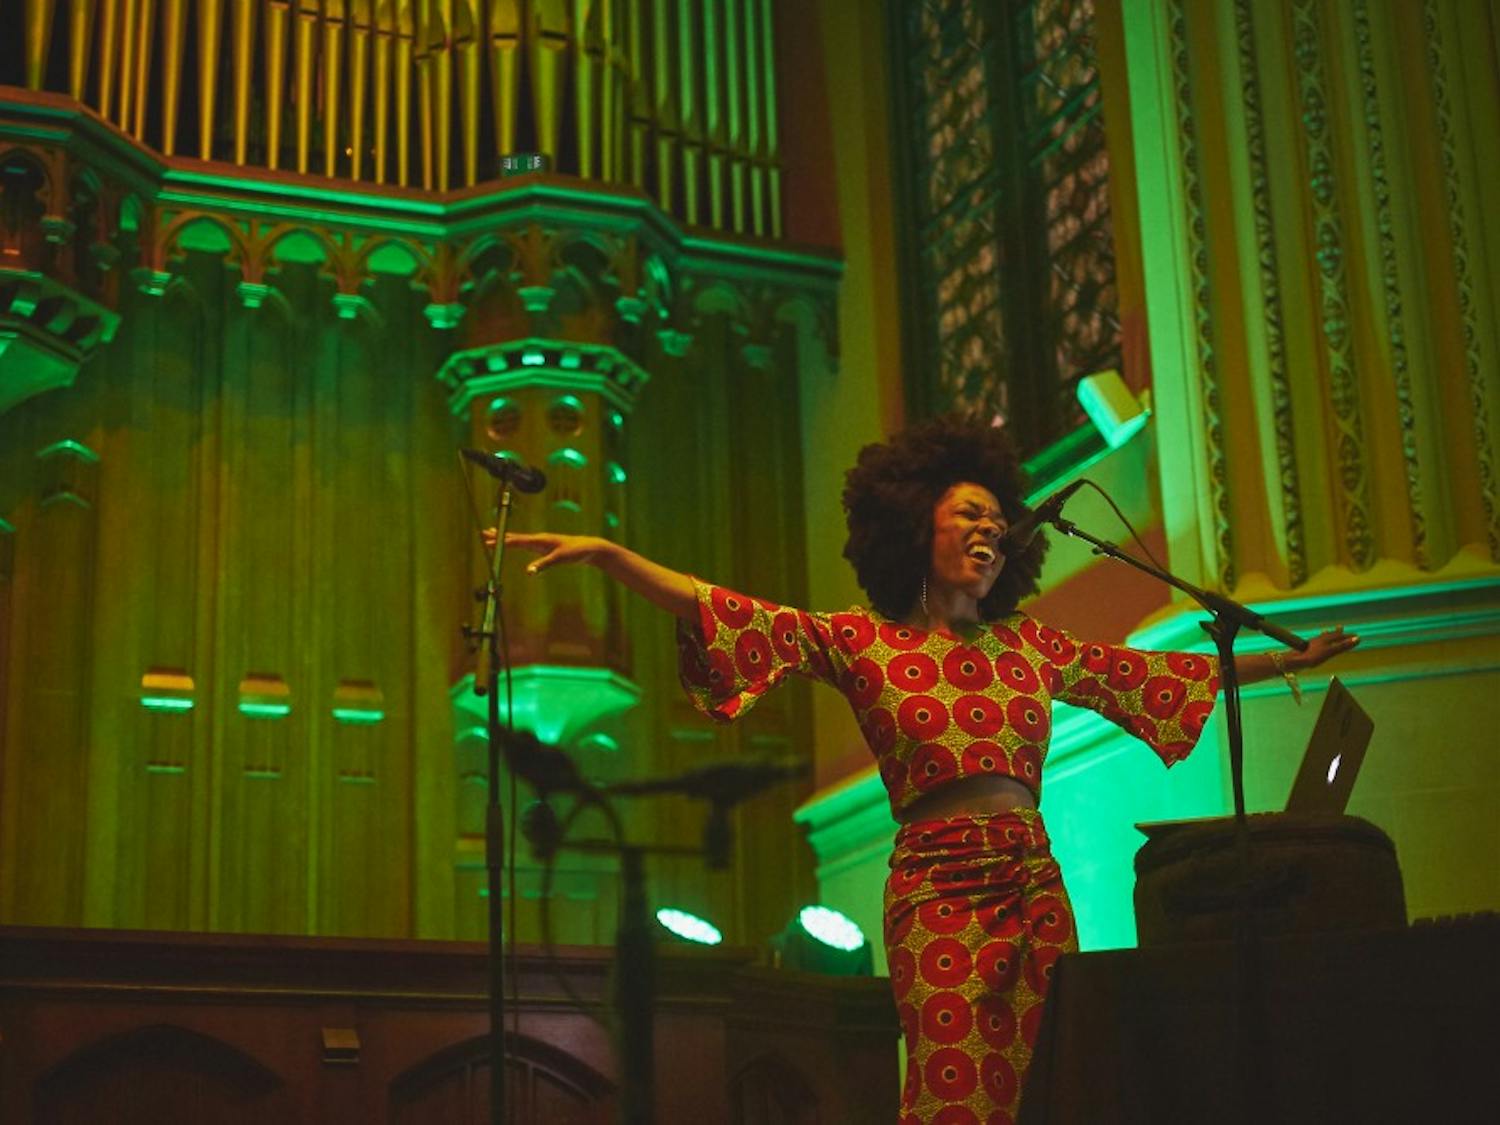 Moogfest boasted talented artists like Sudan Archives, pictured at Durham's First Presbyterian Church, but its message of protest often contradicted itself.